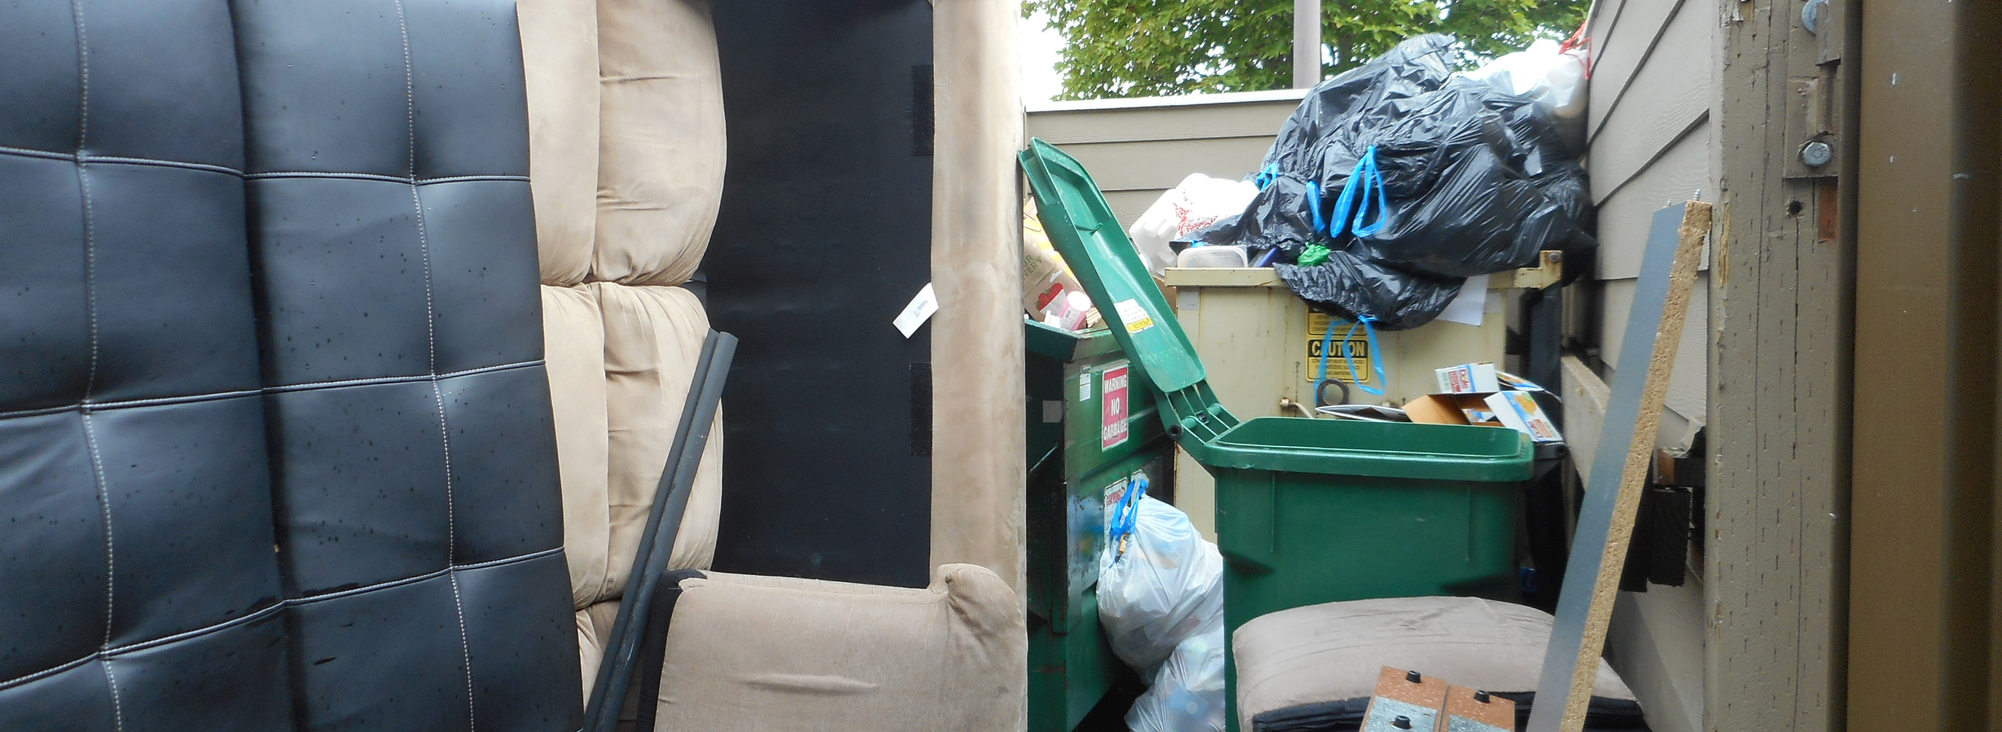 couch and other furniture in recycling area alongside recycling bins and dumpster